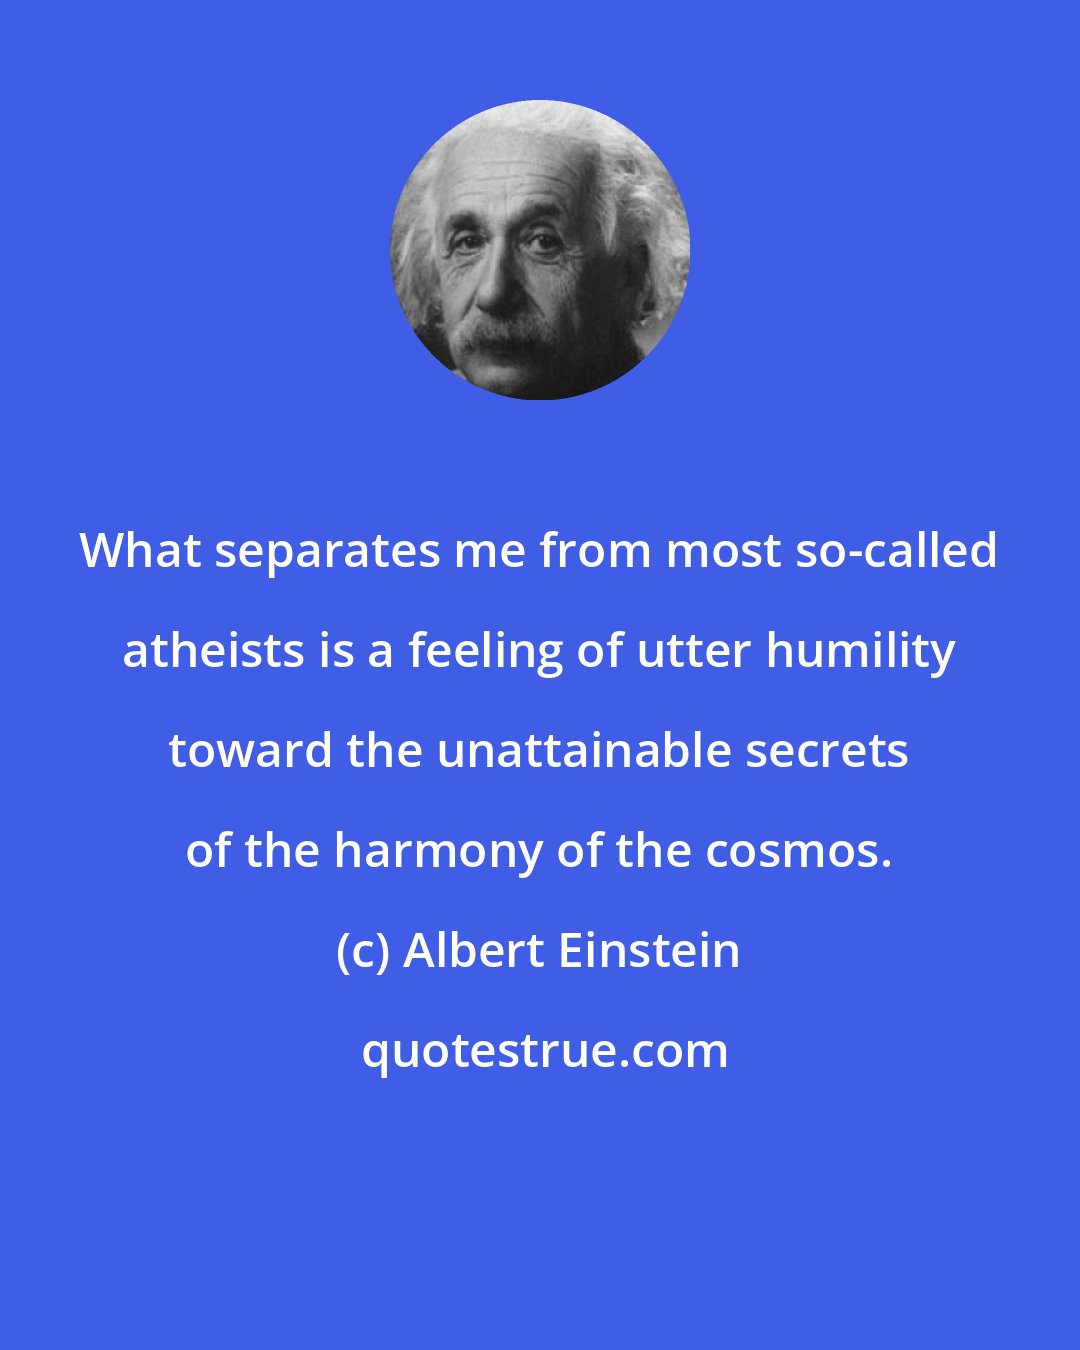 Albert Einstein: What separates me from most so-called atheists is a feeling of utter humility toward the unattainable secrets of the harmony of the cosmos.